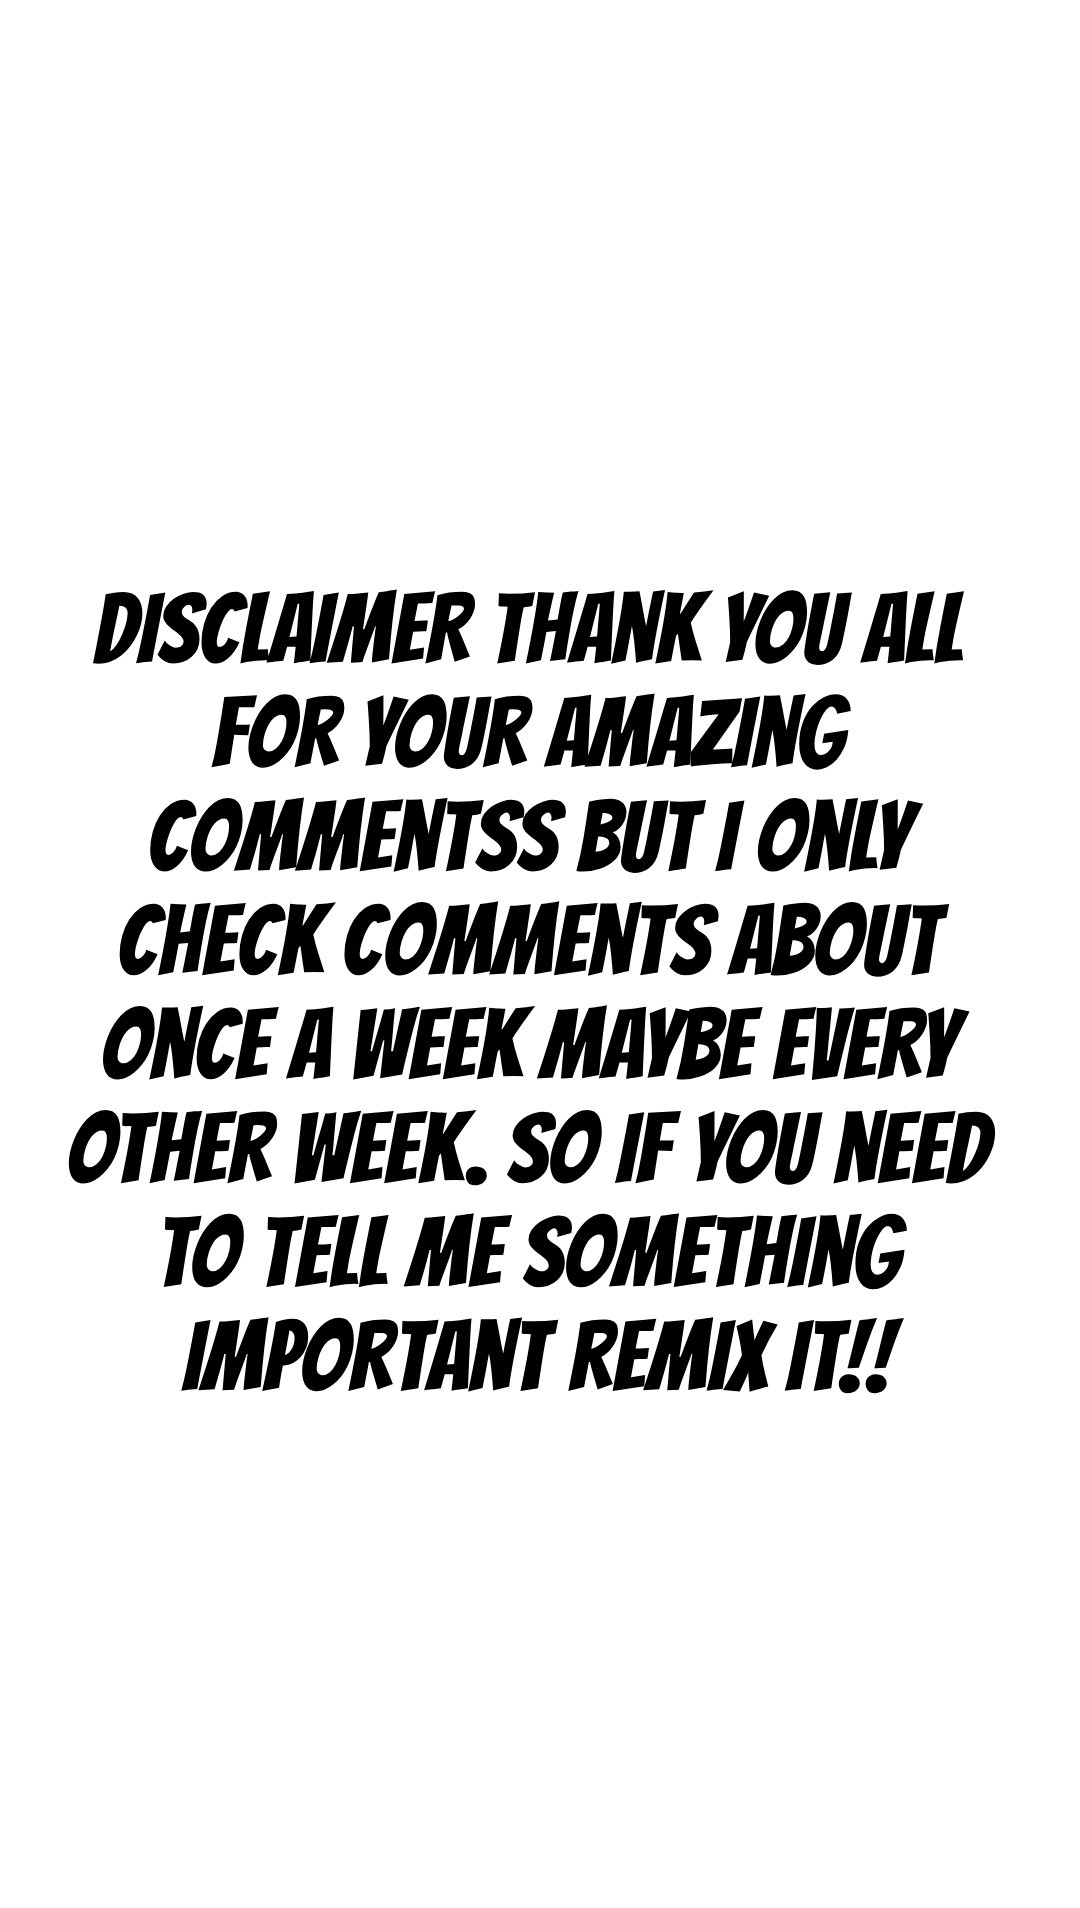 DISCLAIMER thank you all for your amazing commentss but I only check comments about once a week maybe every other week. So if you need to tell me something important remix it!!